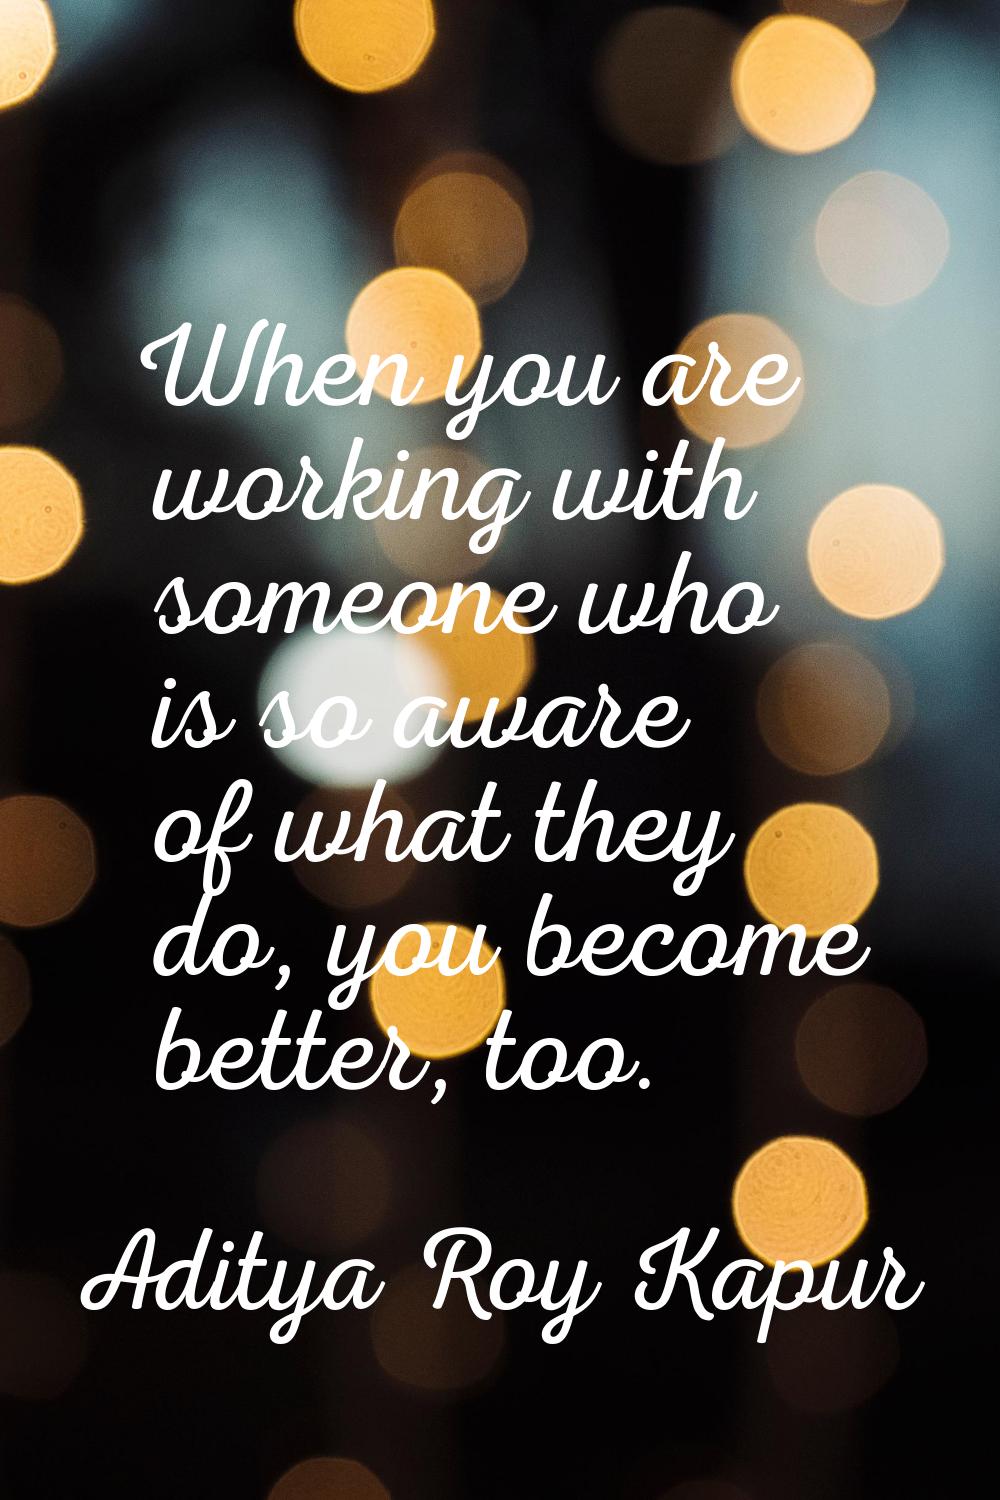 When you are working with someone who is so aware of what they do, you become better, too.